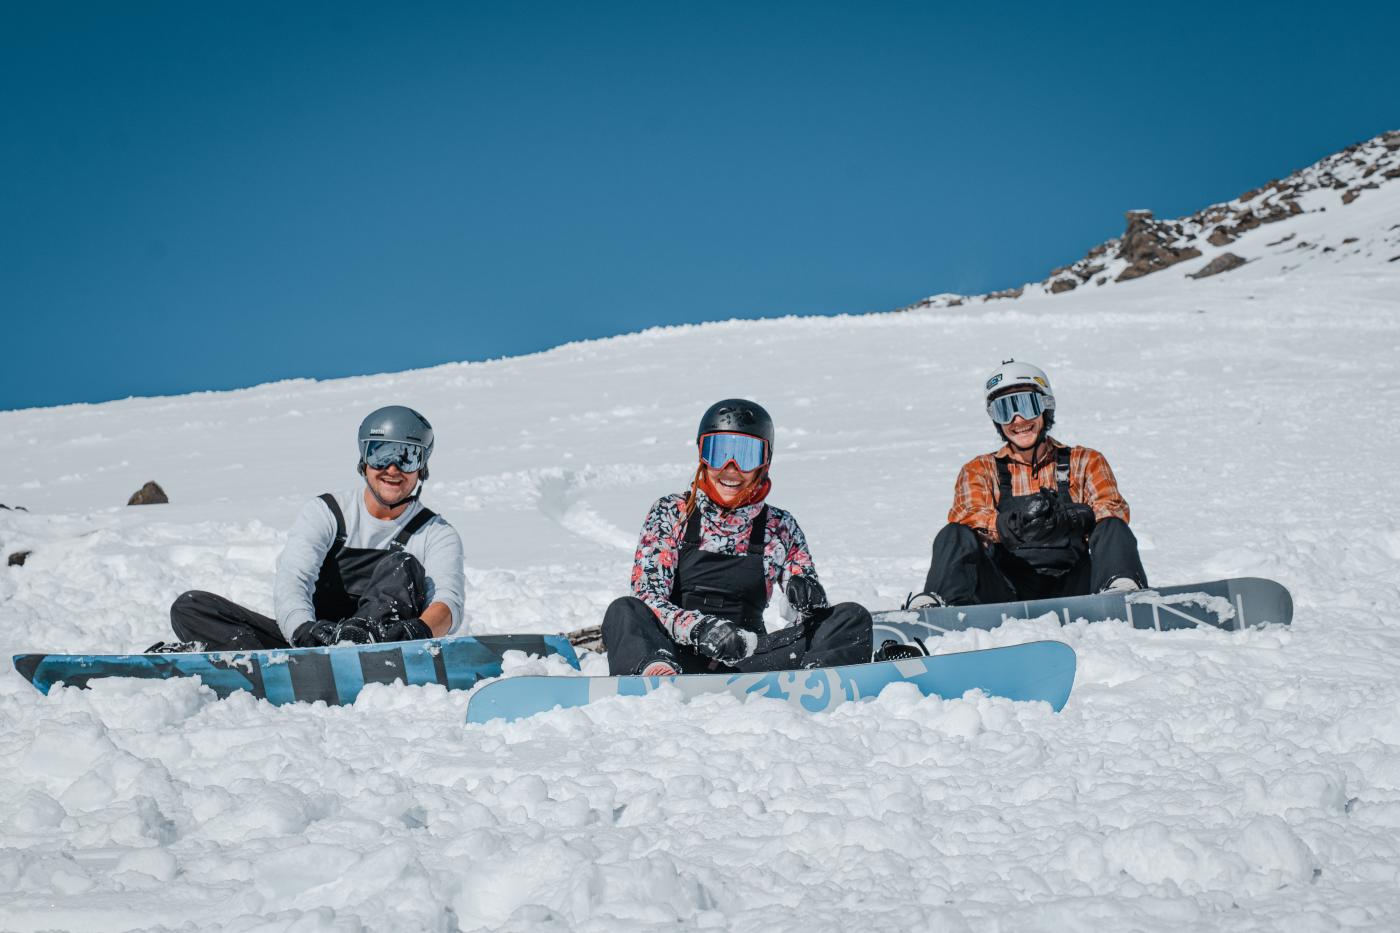 Three Snowboarders at sitting on the slope at The Remarkables